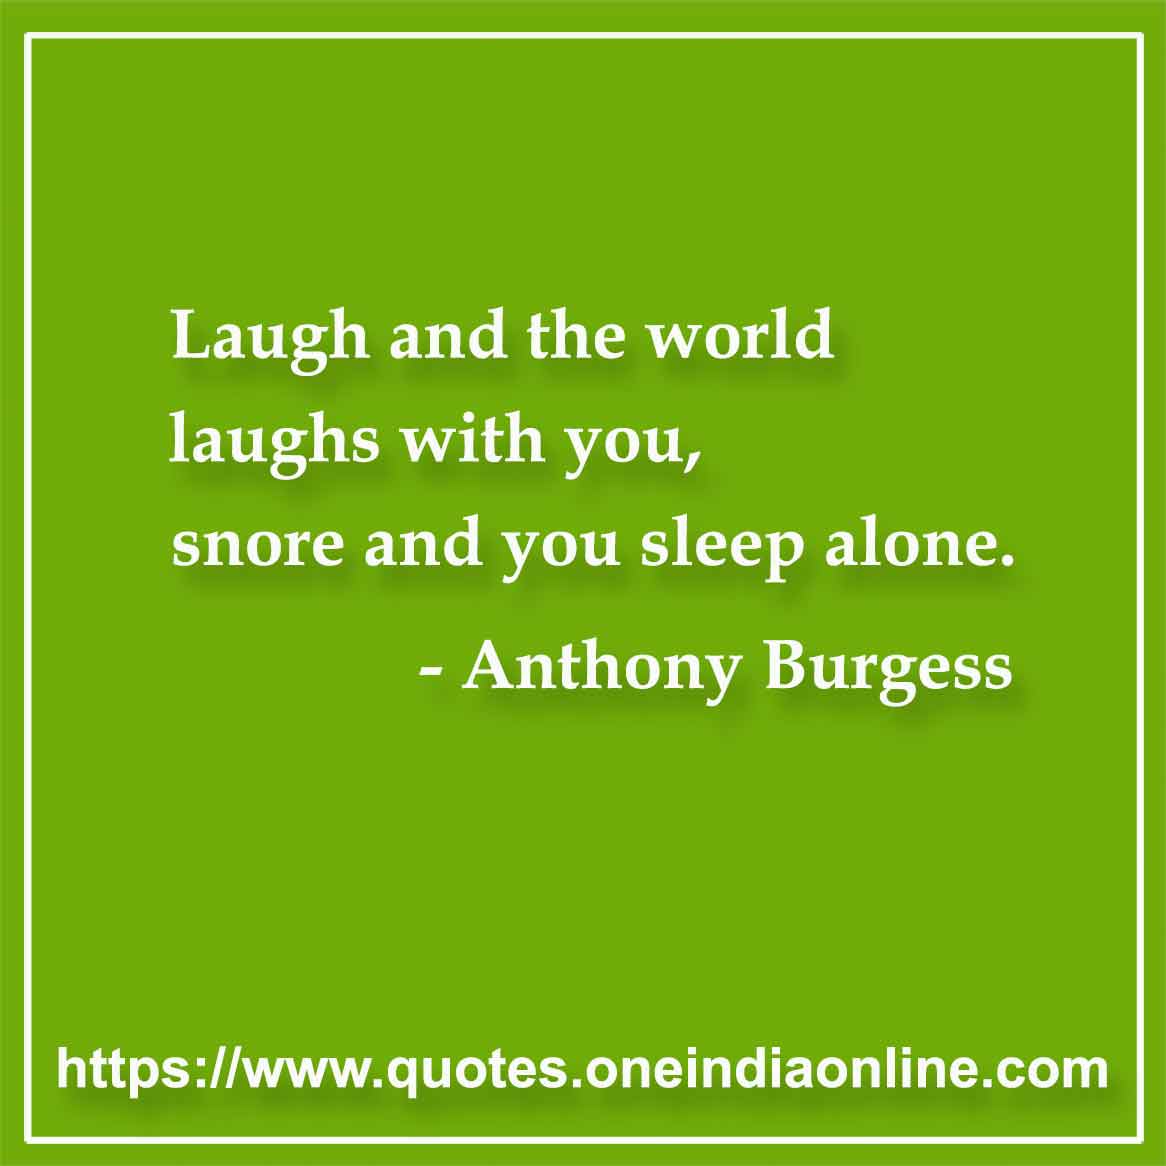 Laugh and the world laughs with you, snore and you sleep alone.

-  by Anthony Burgess